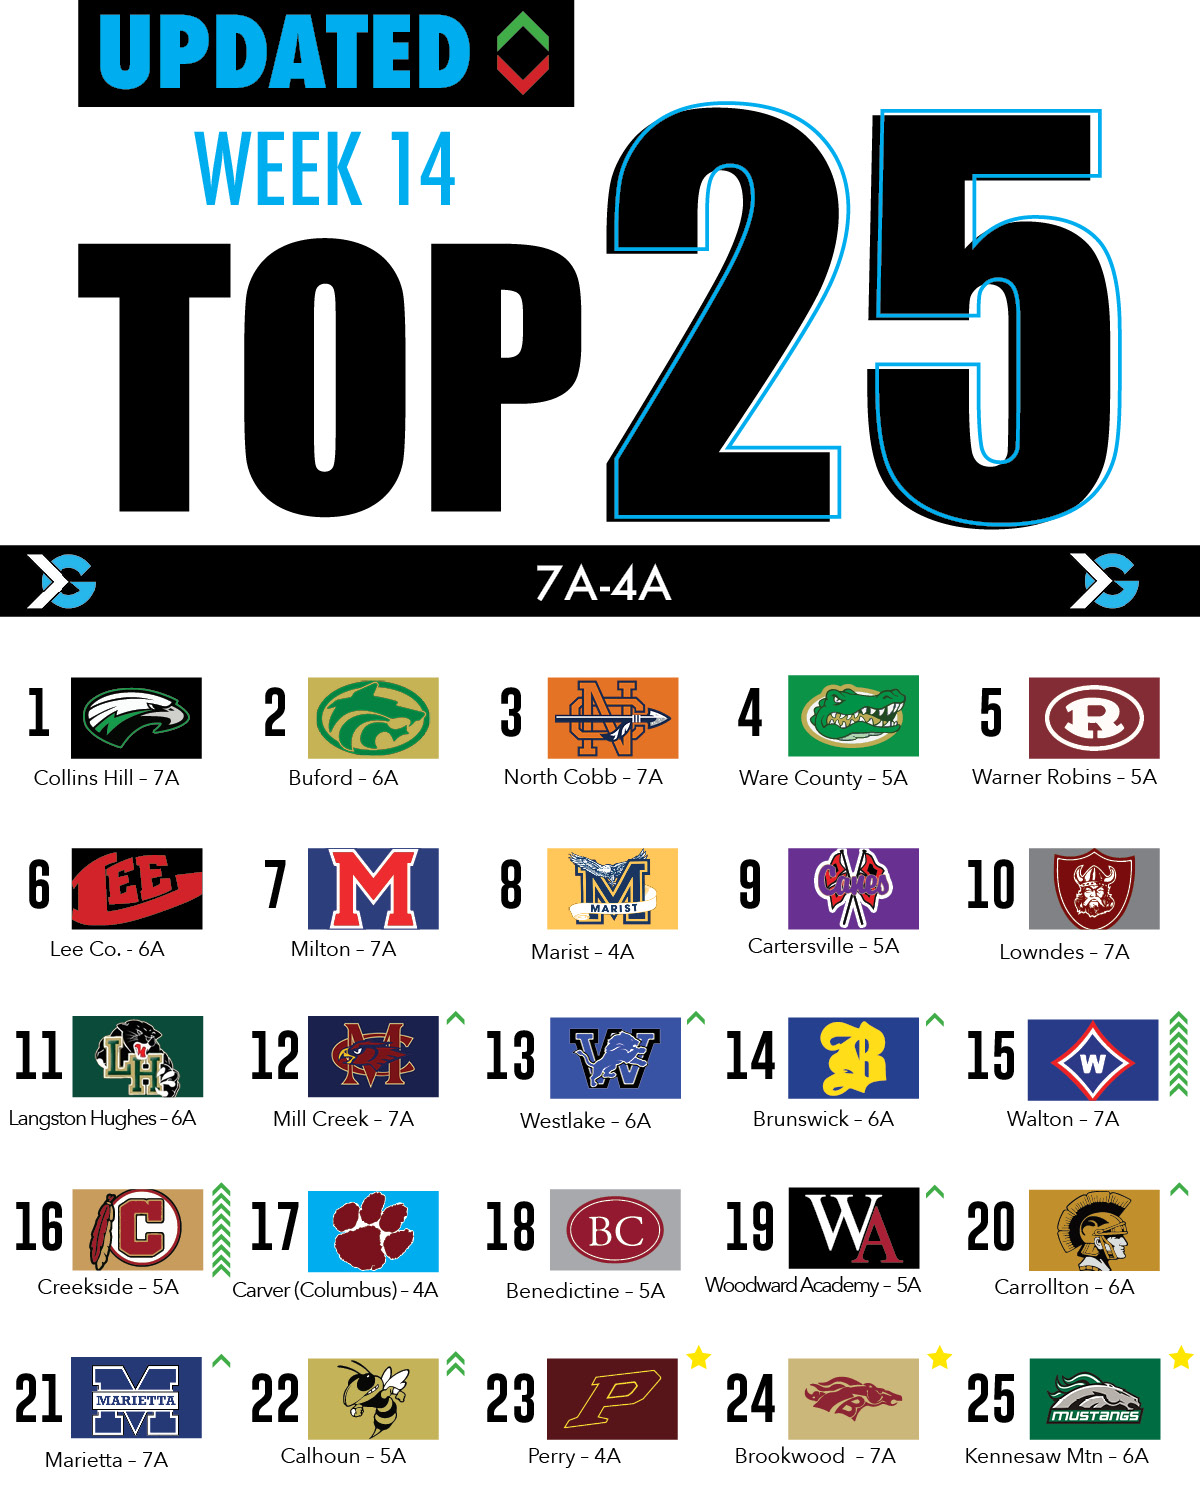 SEC Football: New AP Top 25 Poll sees a shift in the Top 4